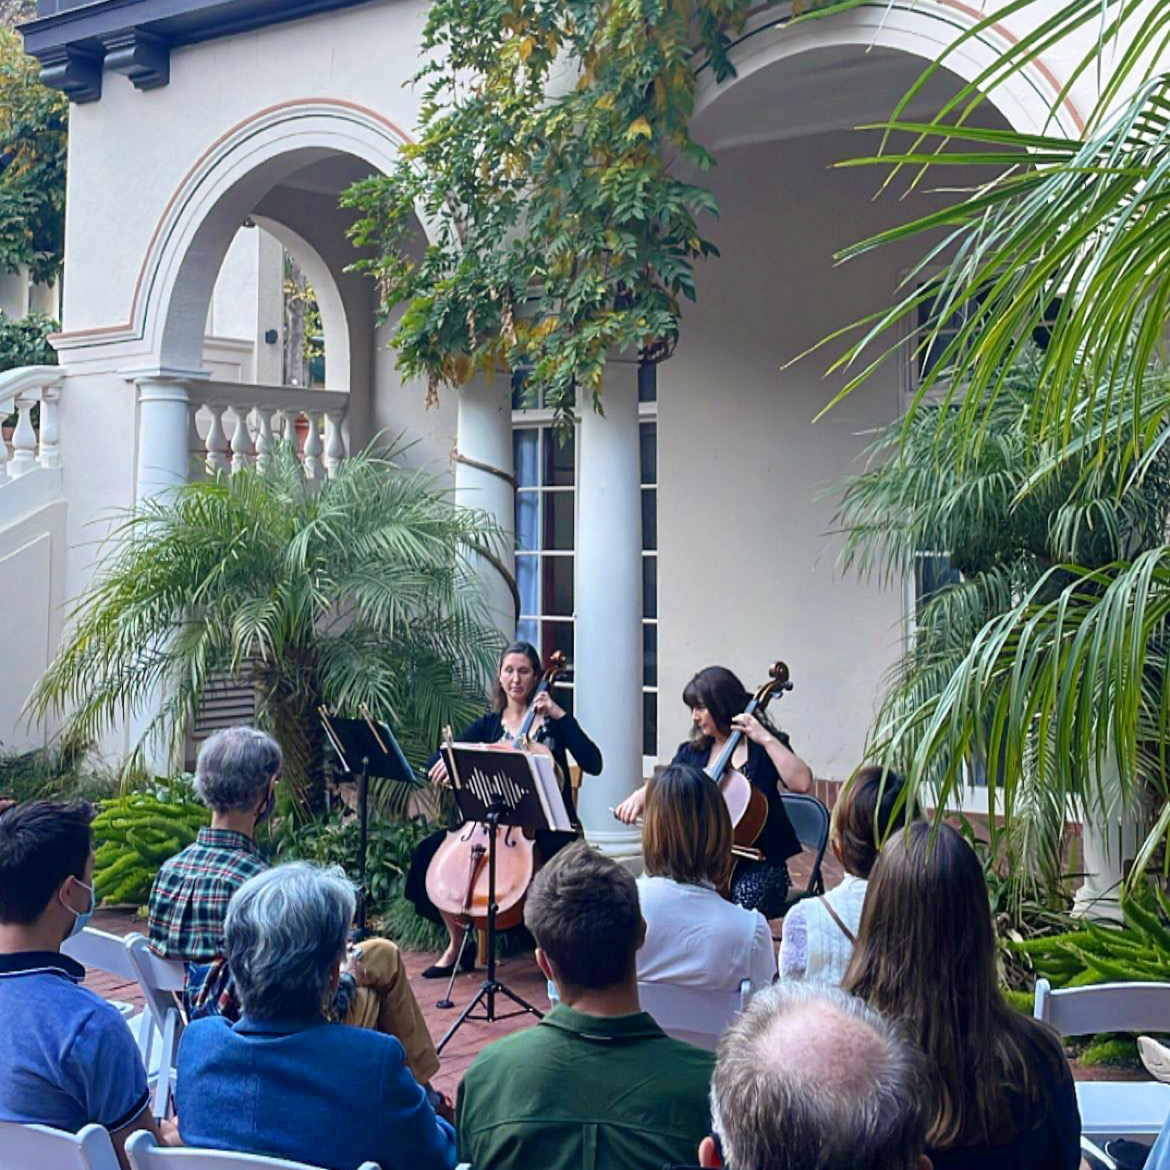 Image: Two cello players perform in a courtyard surrounded by a seated audience